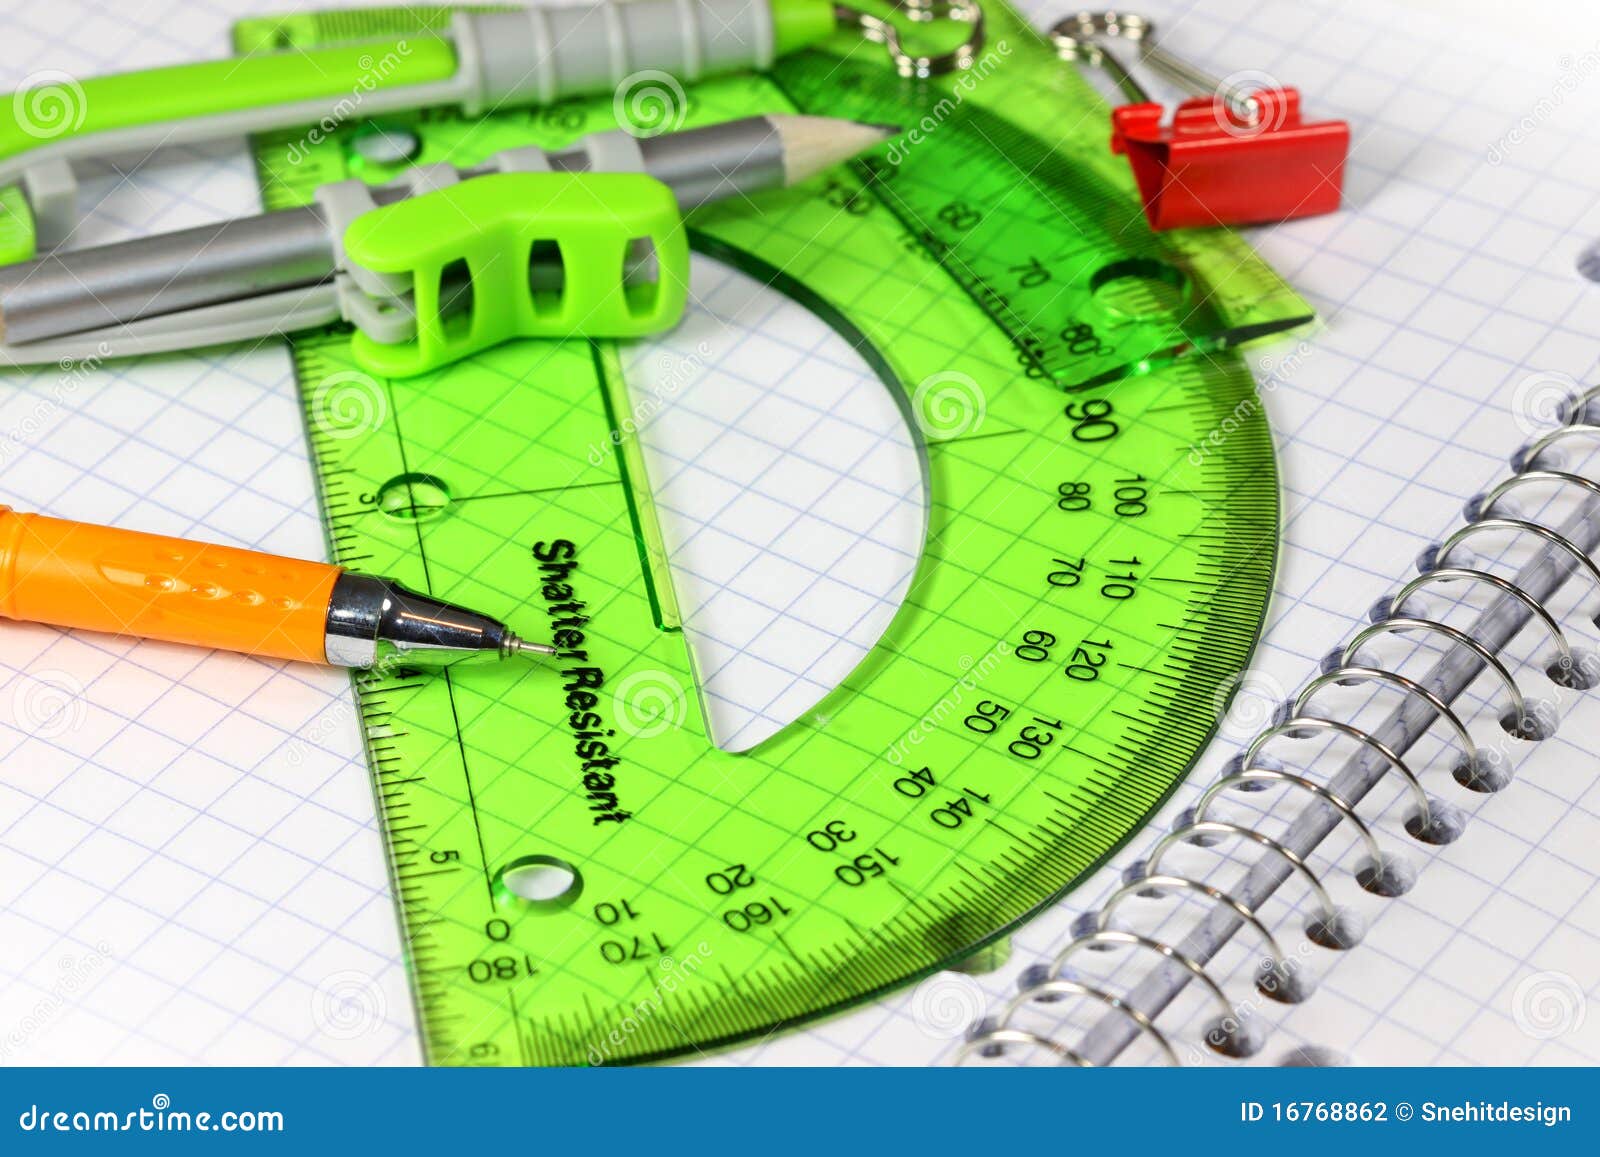  Drawing concept stock photo. Image of graphic plan designer - 16768862